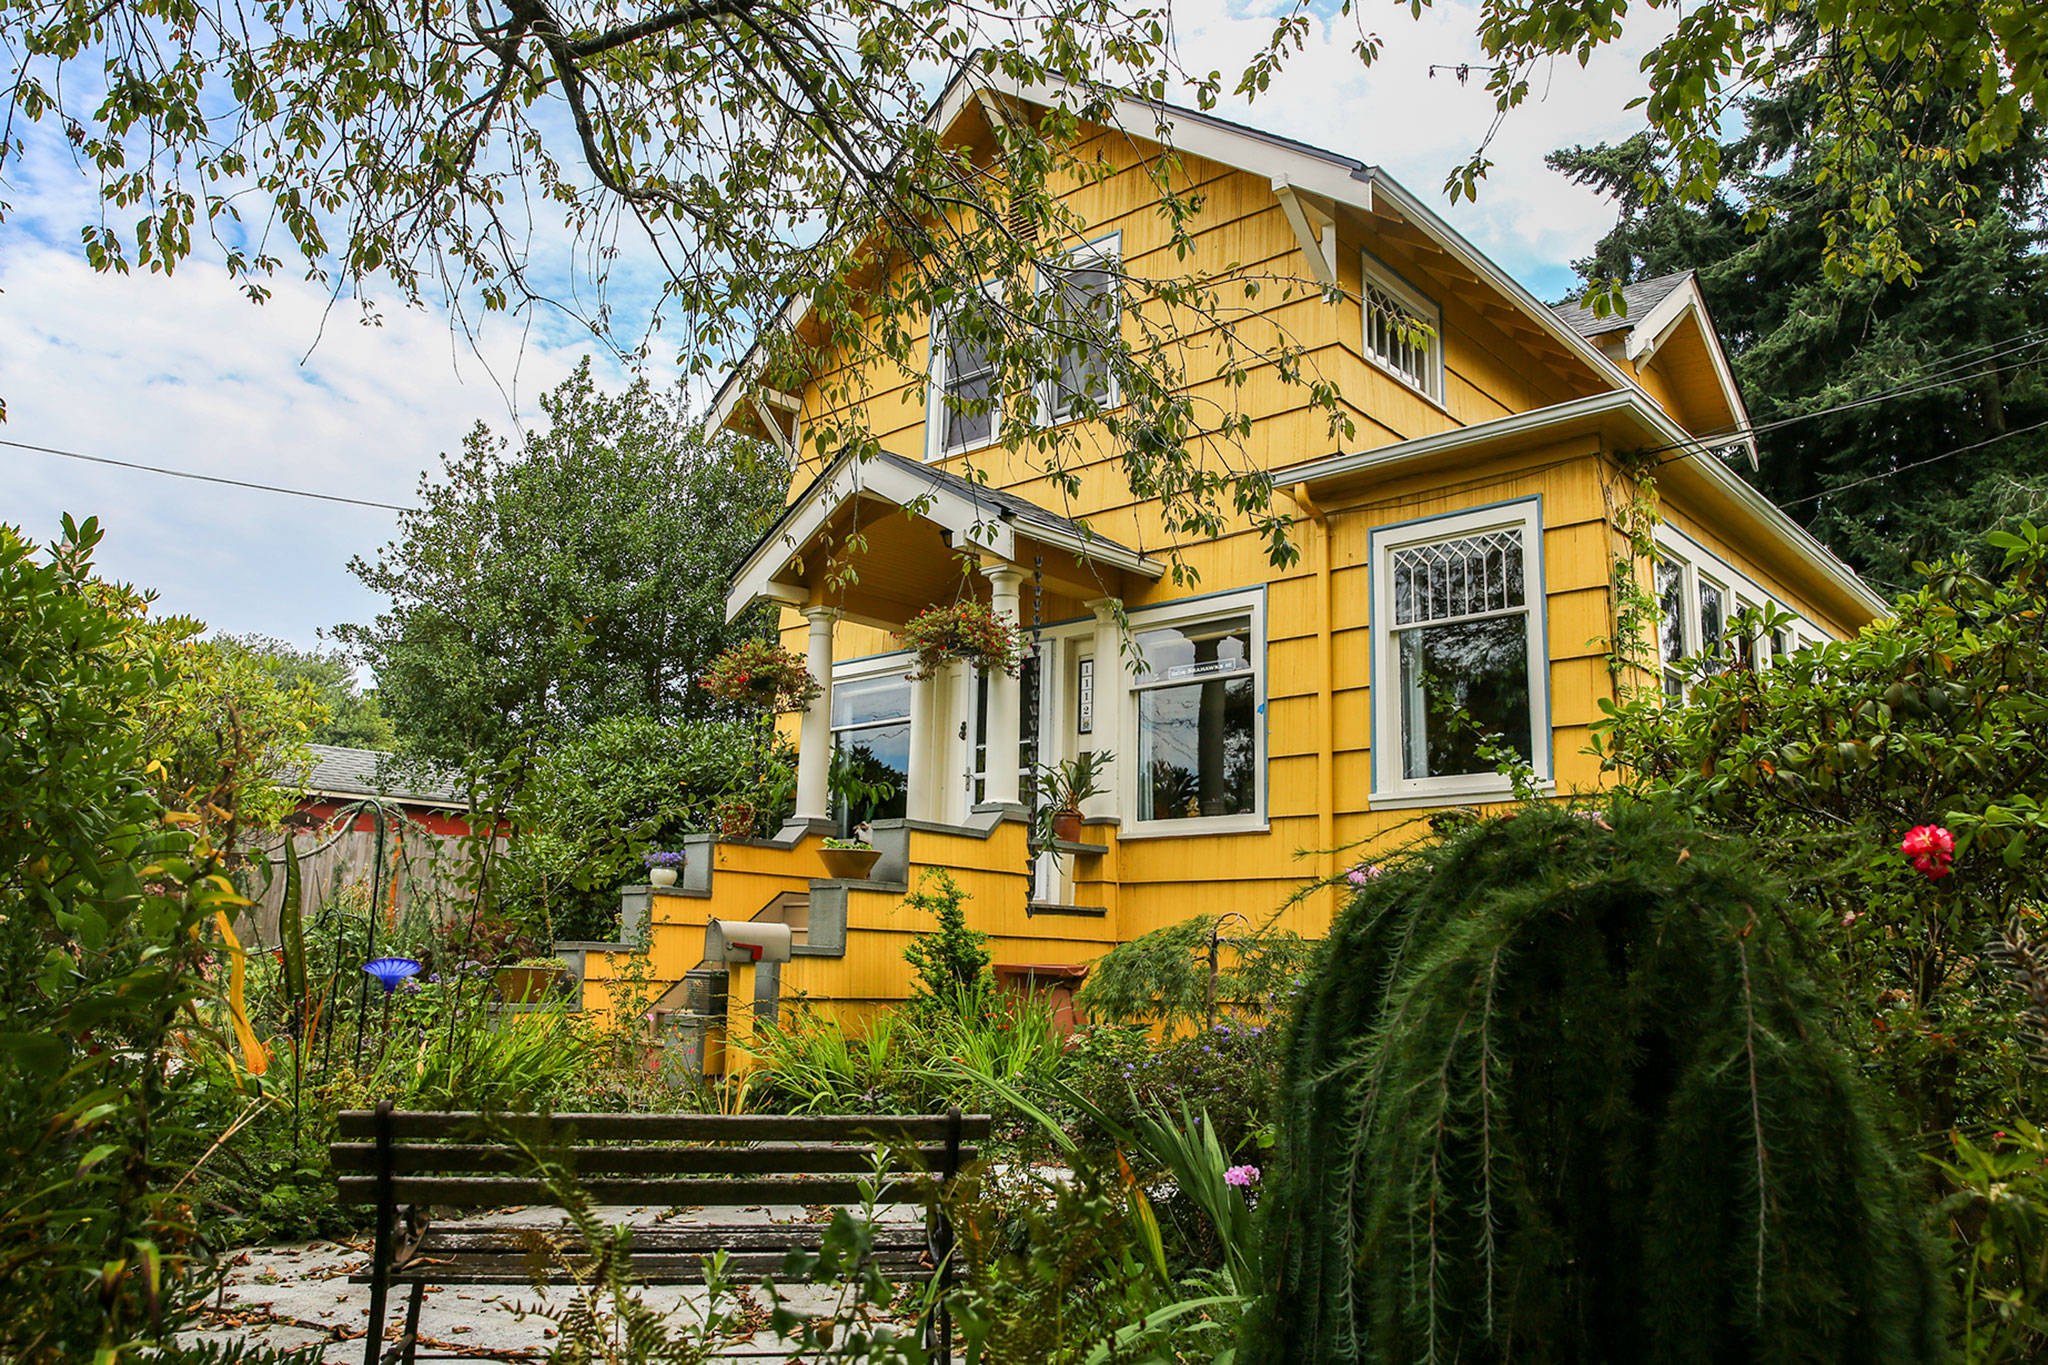 Susan and Ted Mausshardt’s home in the Port Gardner neighborhood is part of the 2019 Historic Everett Home Tour on Sept. 14. (Kevin Clark / The Herald)